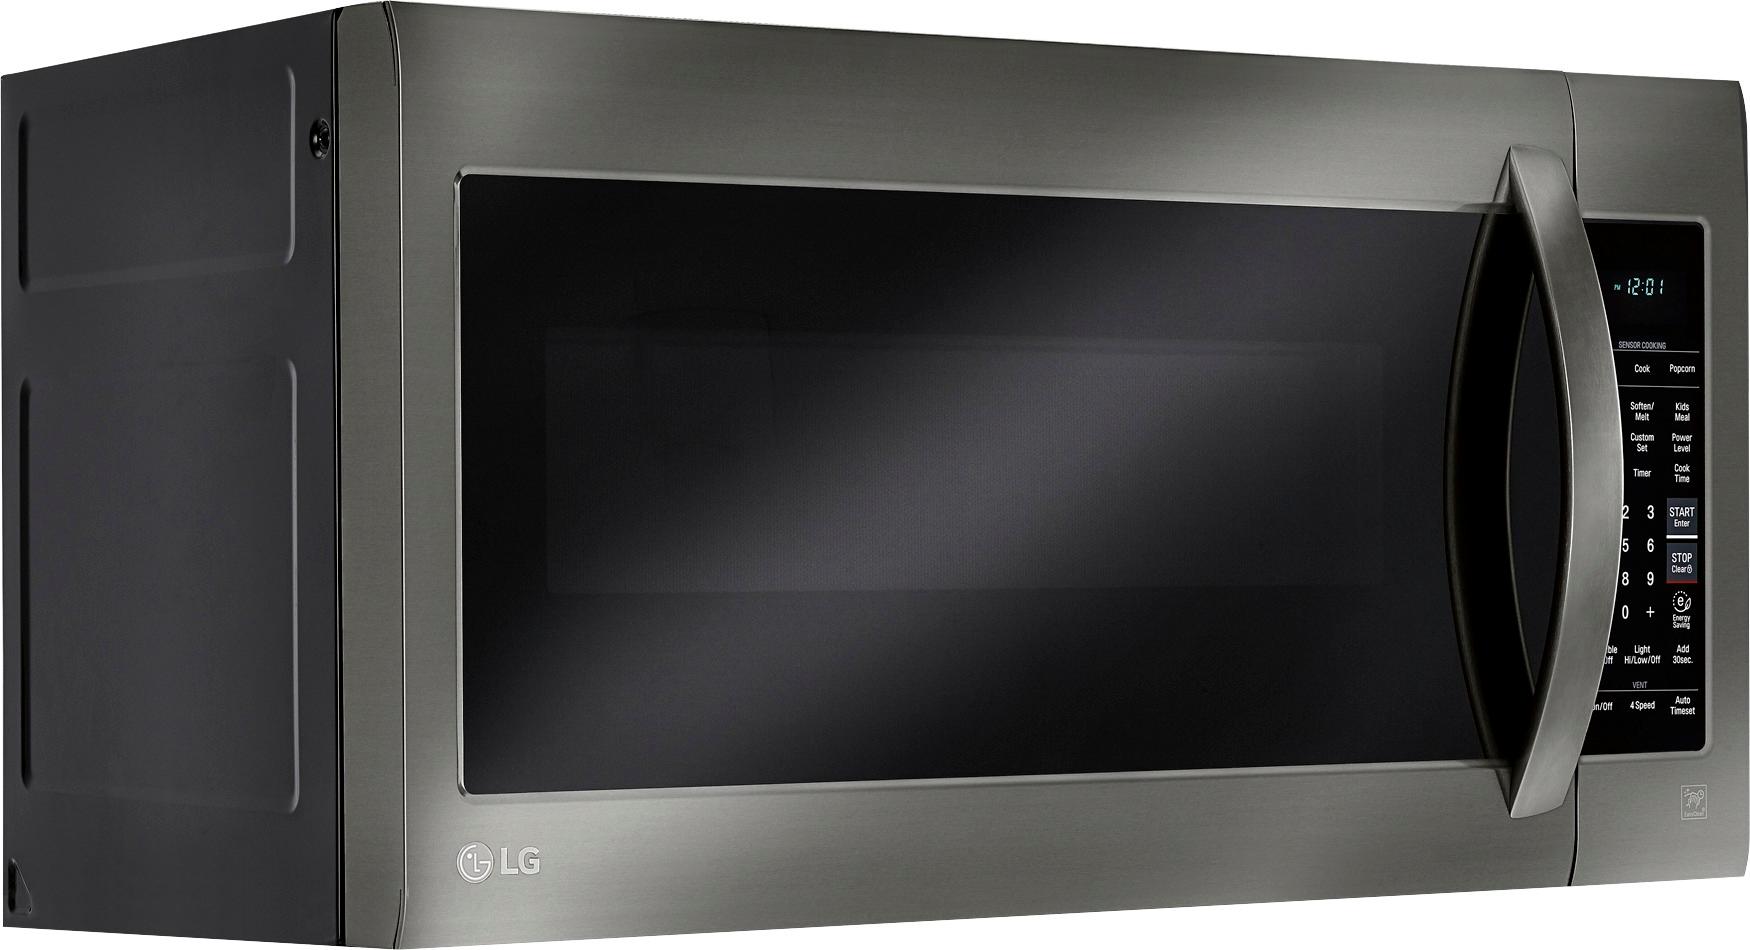 Angle View: LG - 2.0 Cu. Ft. Over-the-Range Microwave with Sensor Cooking and EasyClean - Black Stainless Steel